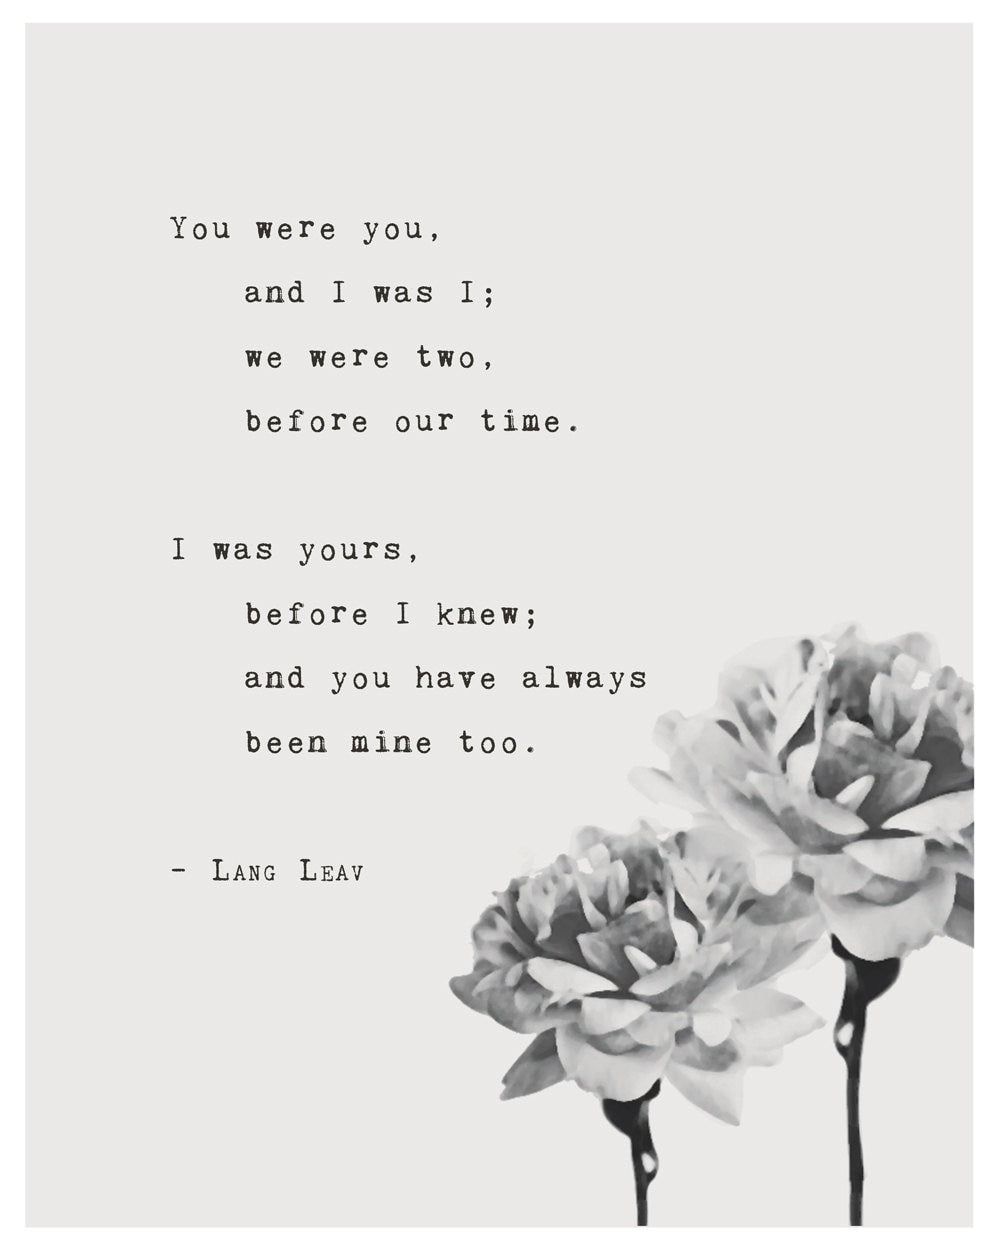 Love poetry "You were you and I was I" by Lang Leav poetry art